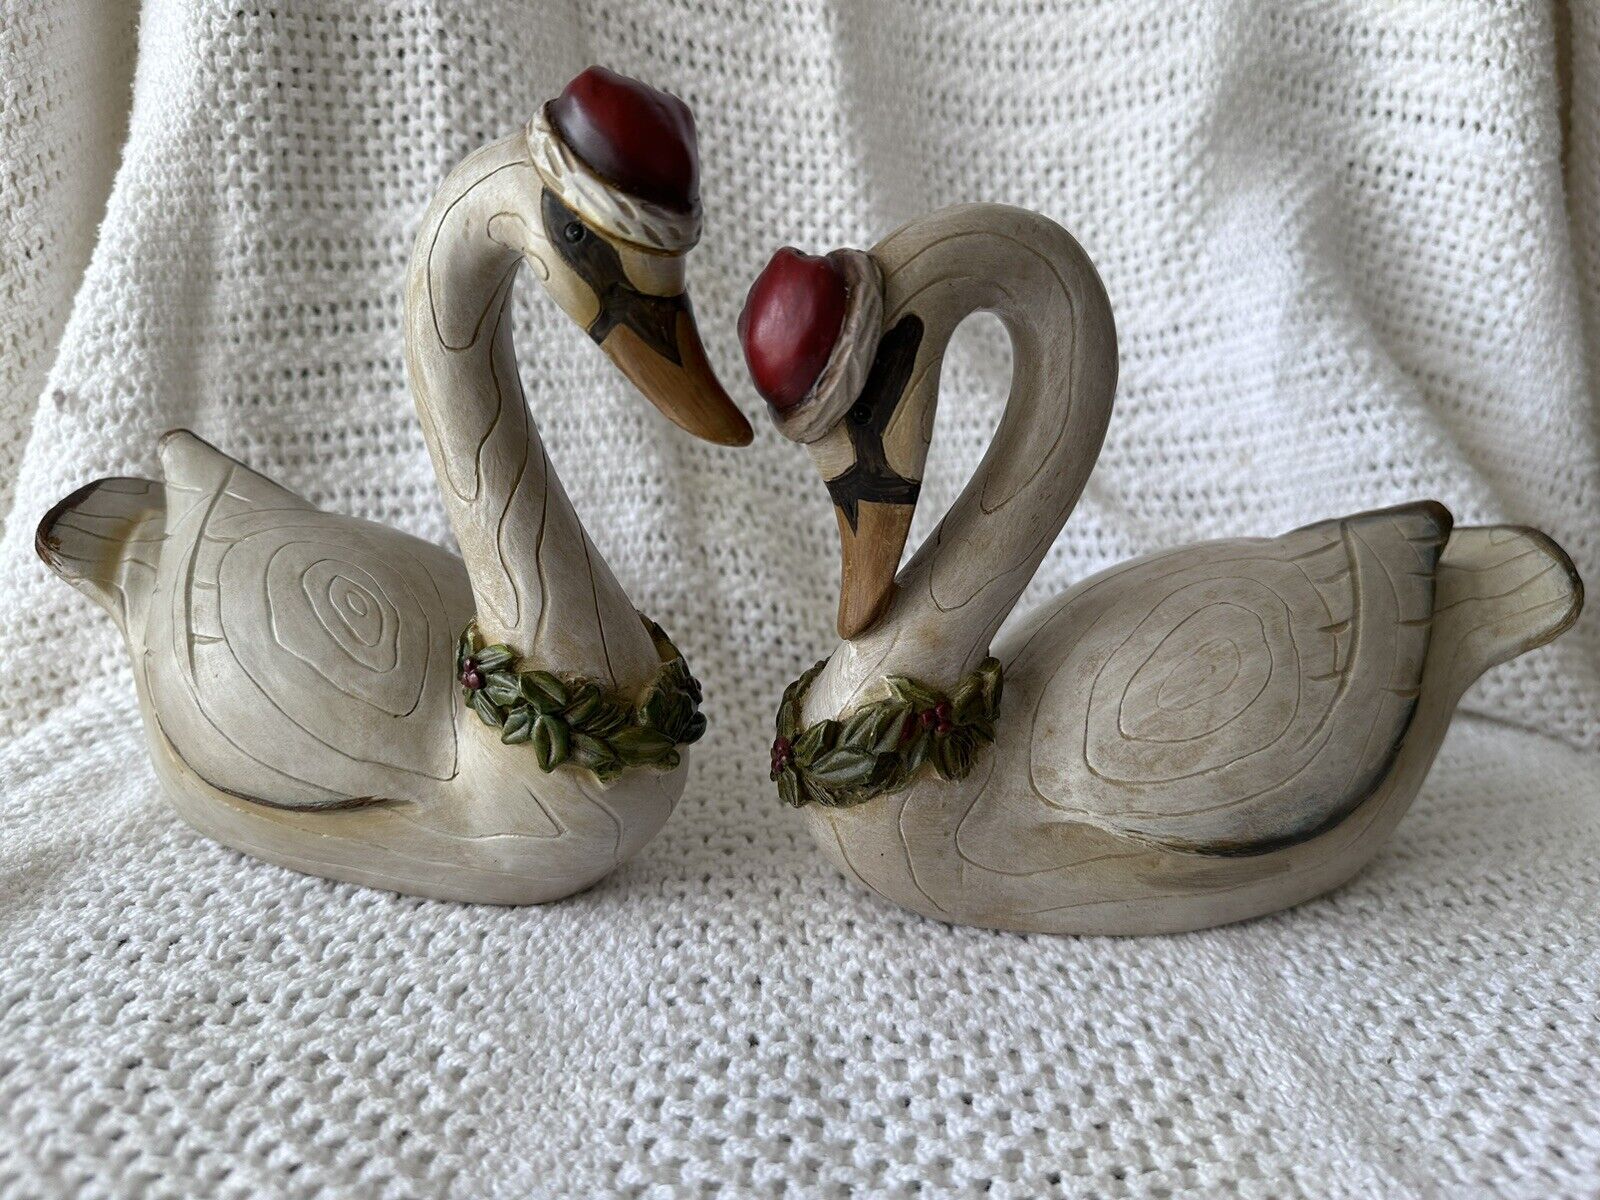 Tii Collections Collectible Holiday Xmas Swan/Goose figurine Autumn Cottage